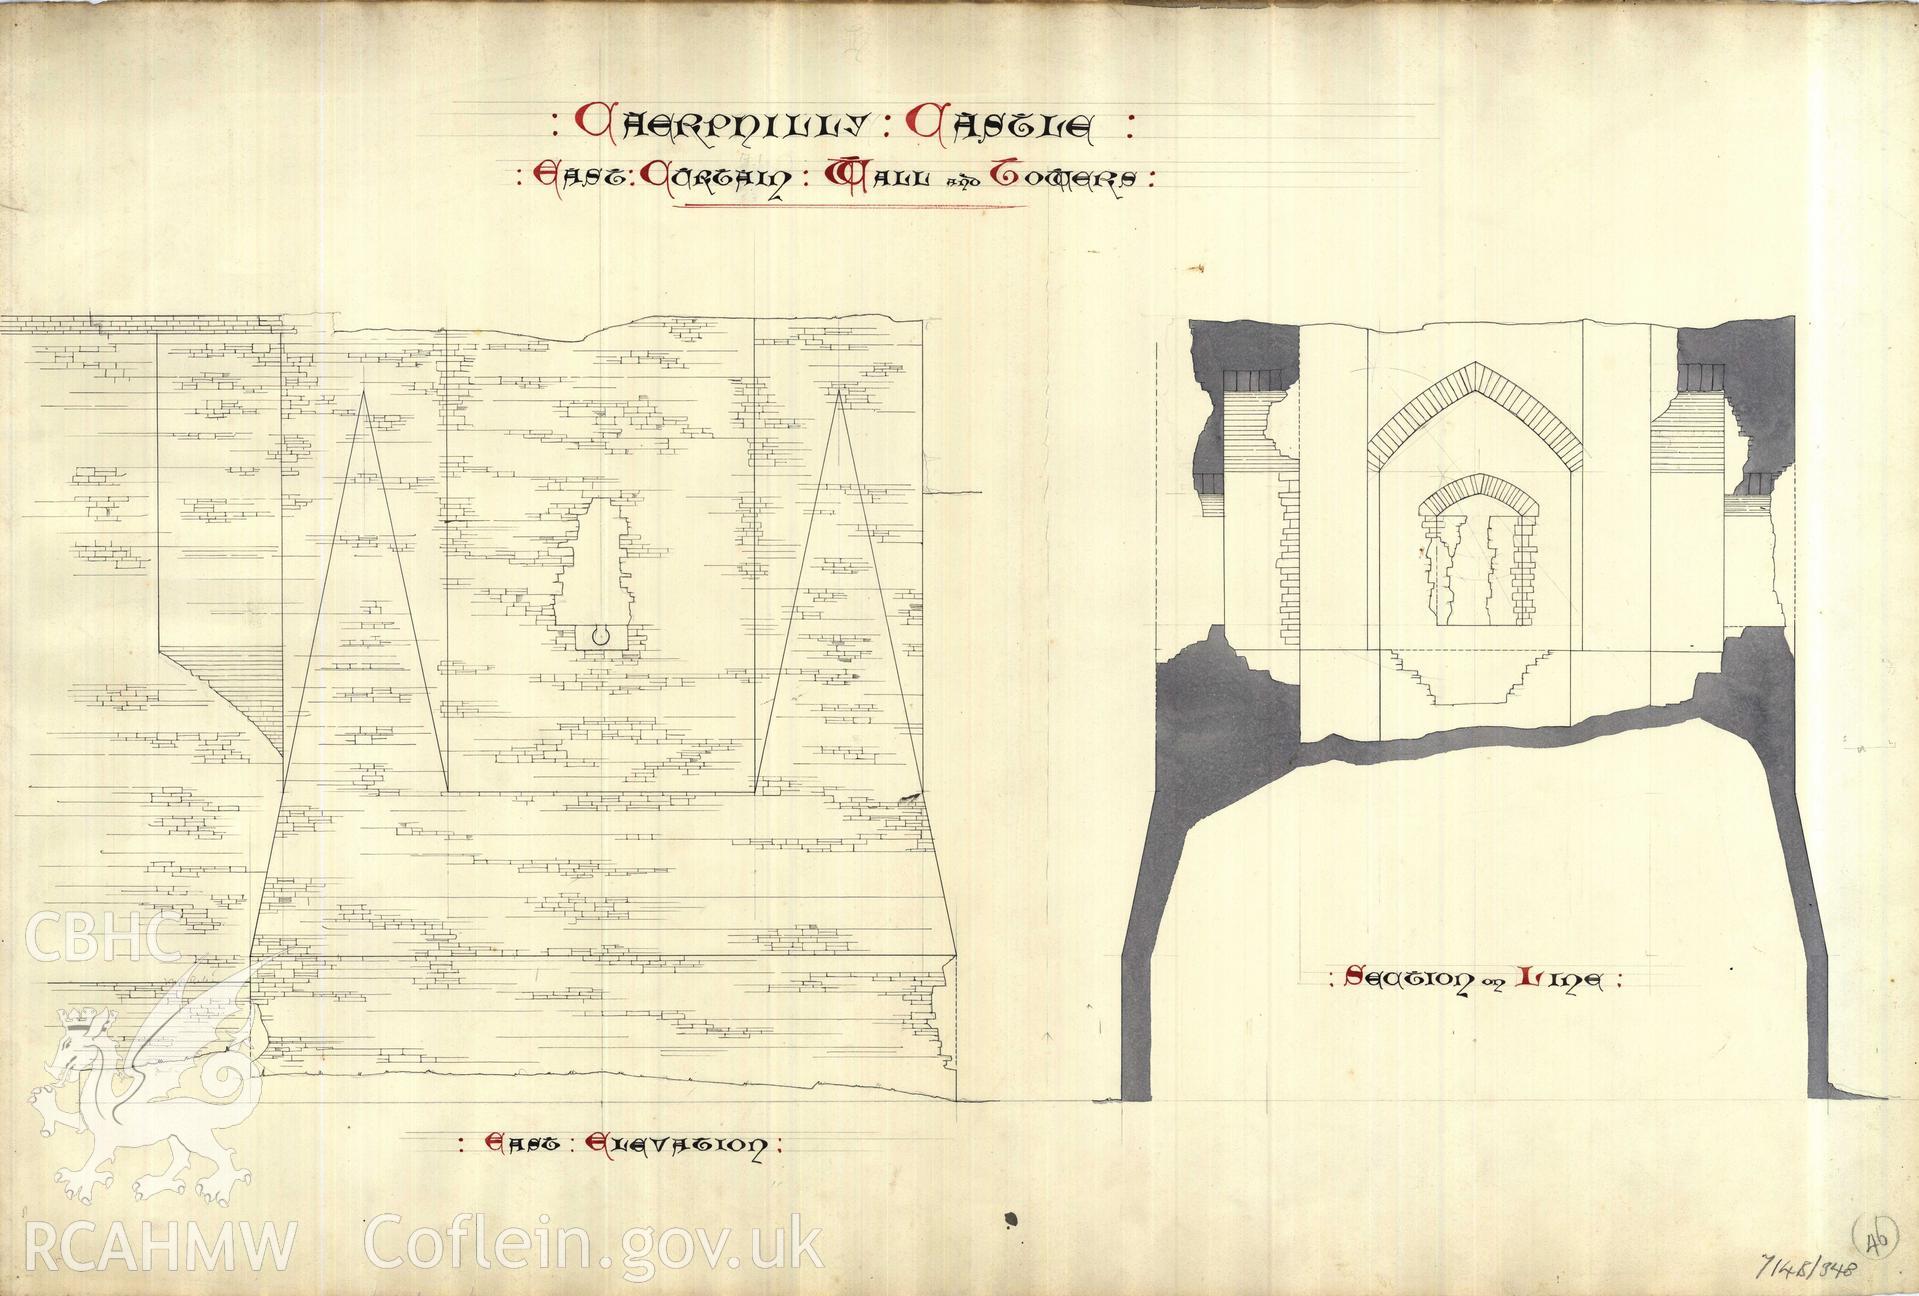 Cadw guardianship monument drawing of Caerphilly Castle. Dam front N, S tower, elev +section. Cadw Ref. No:714B/348. Scale 1:24.